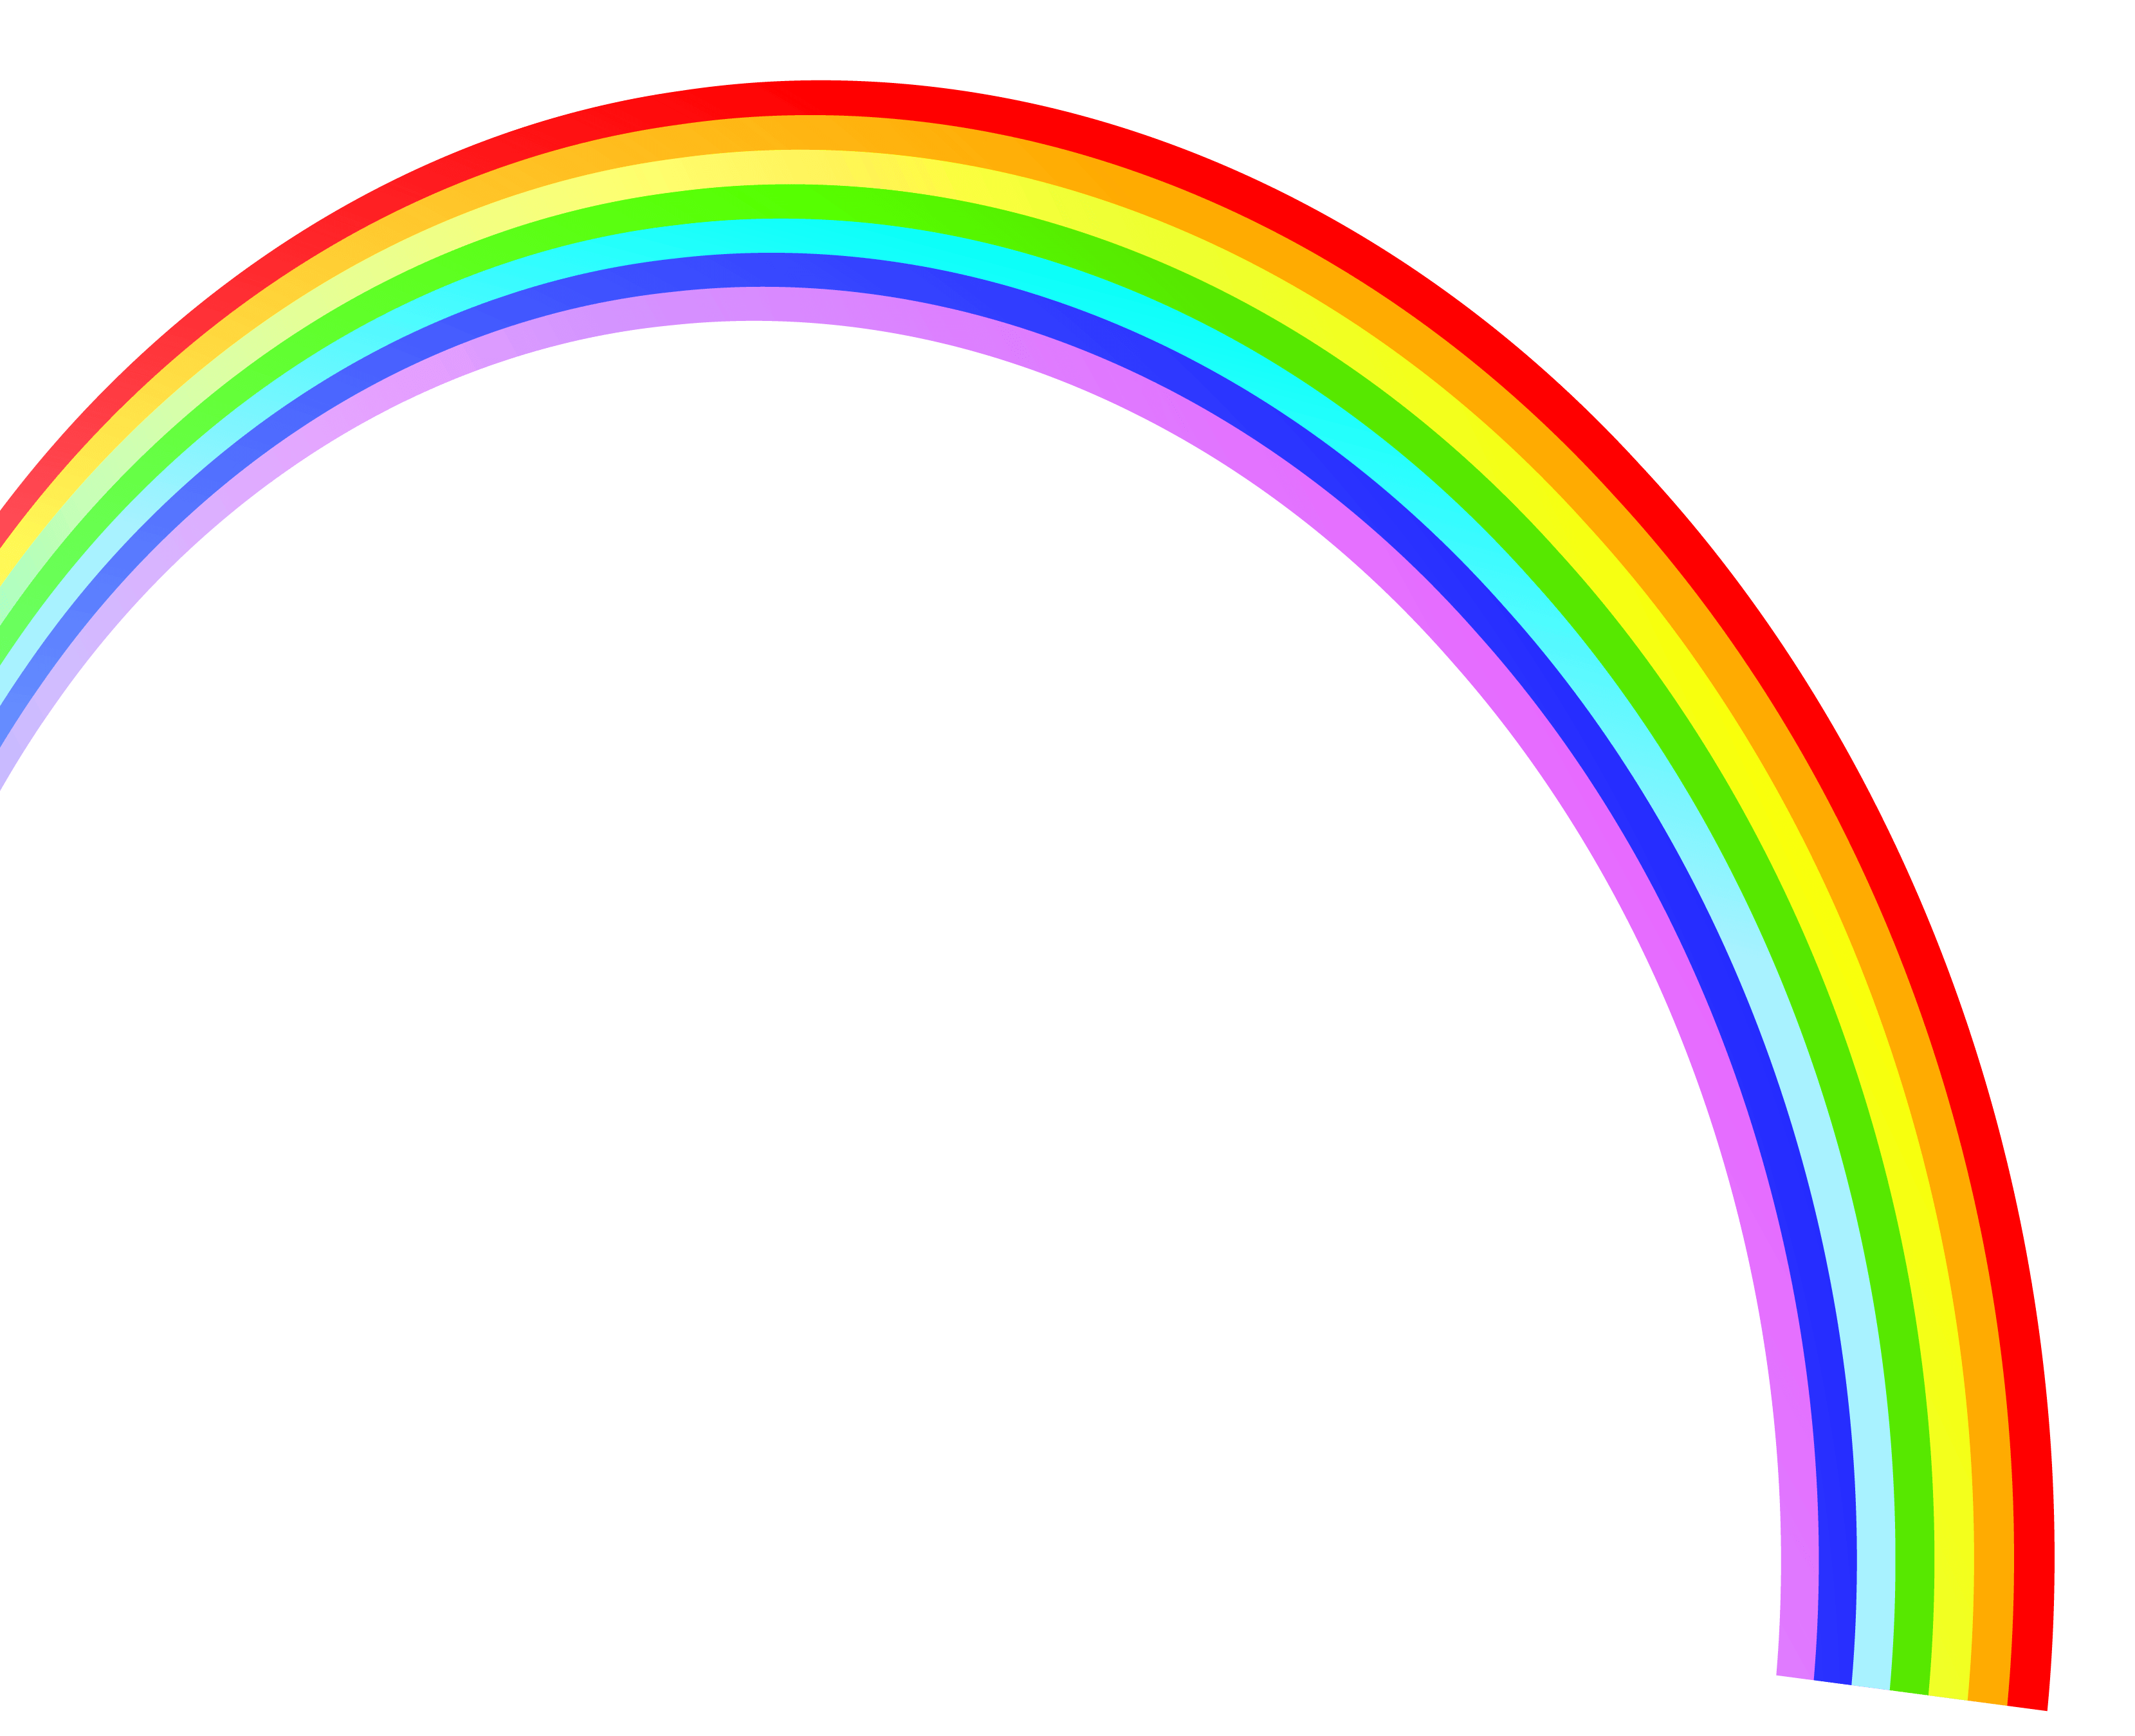 Rainbow Clip art - Rainbow Png Image png download - 3319*2699 - Free ...